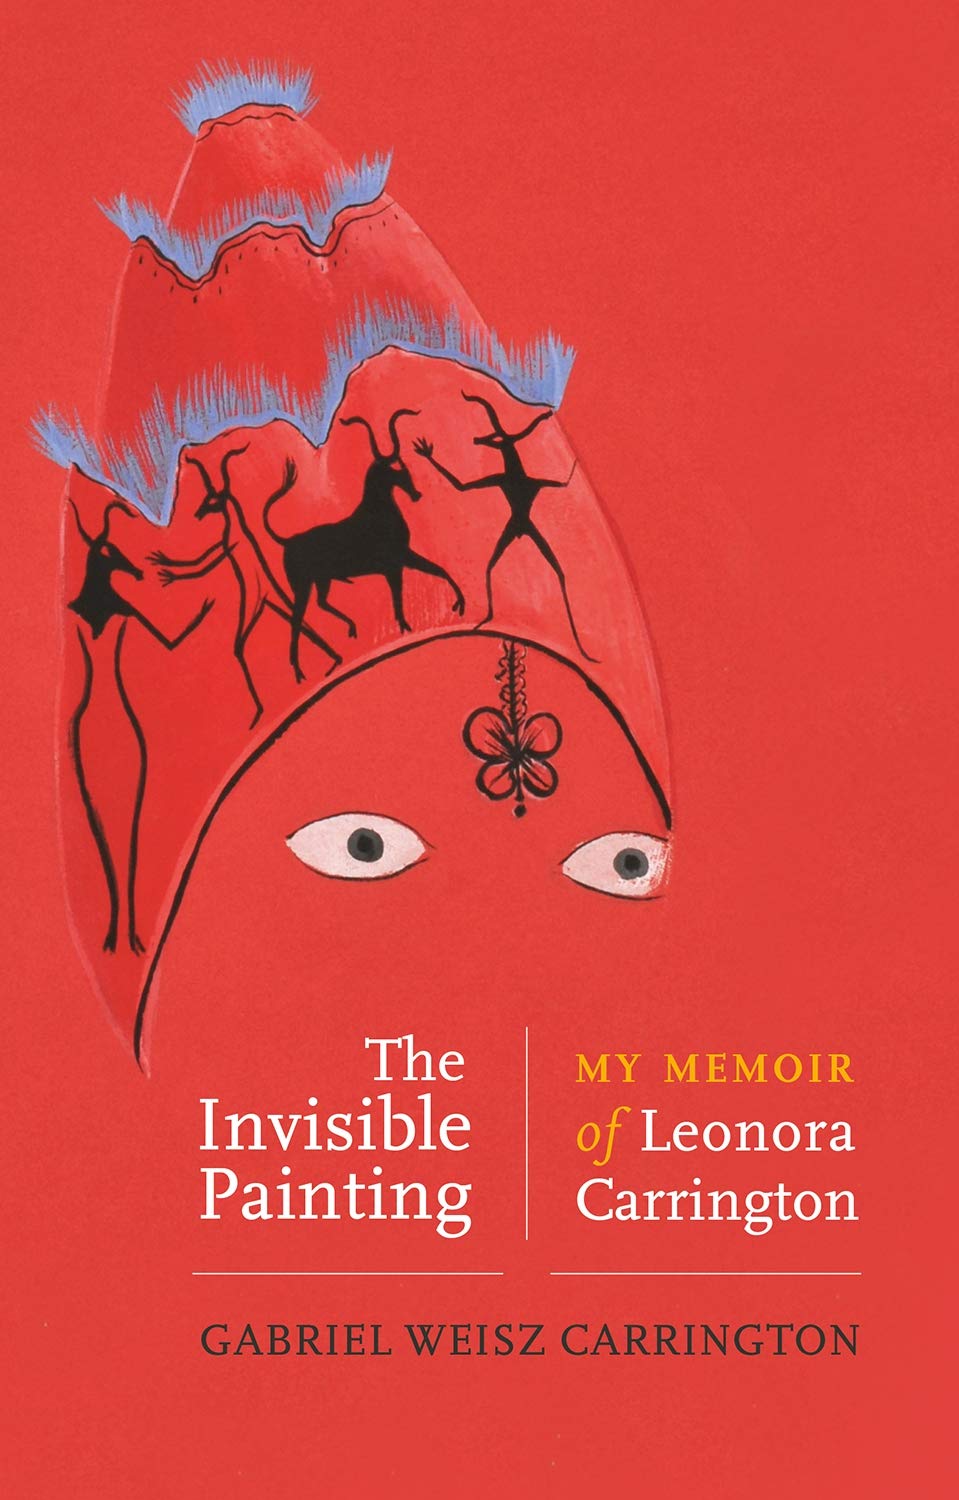 The Invisible Painting: My Memoir of Leonora Carrington